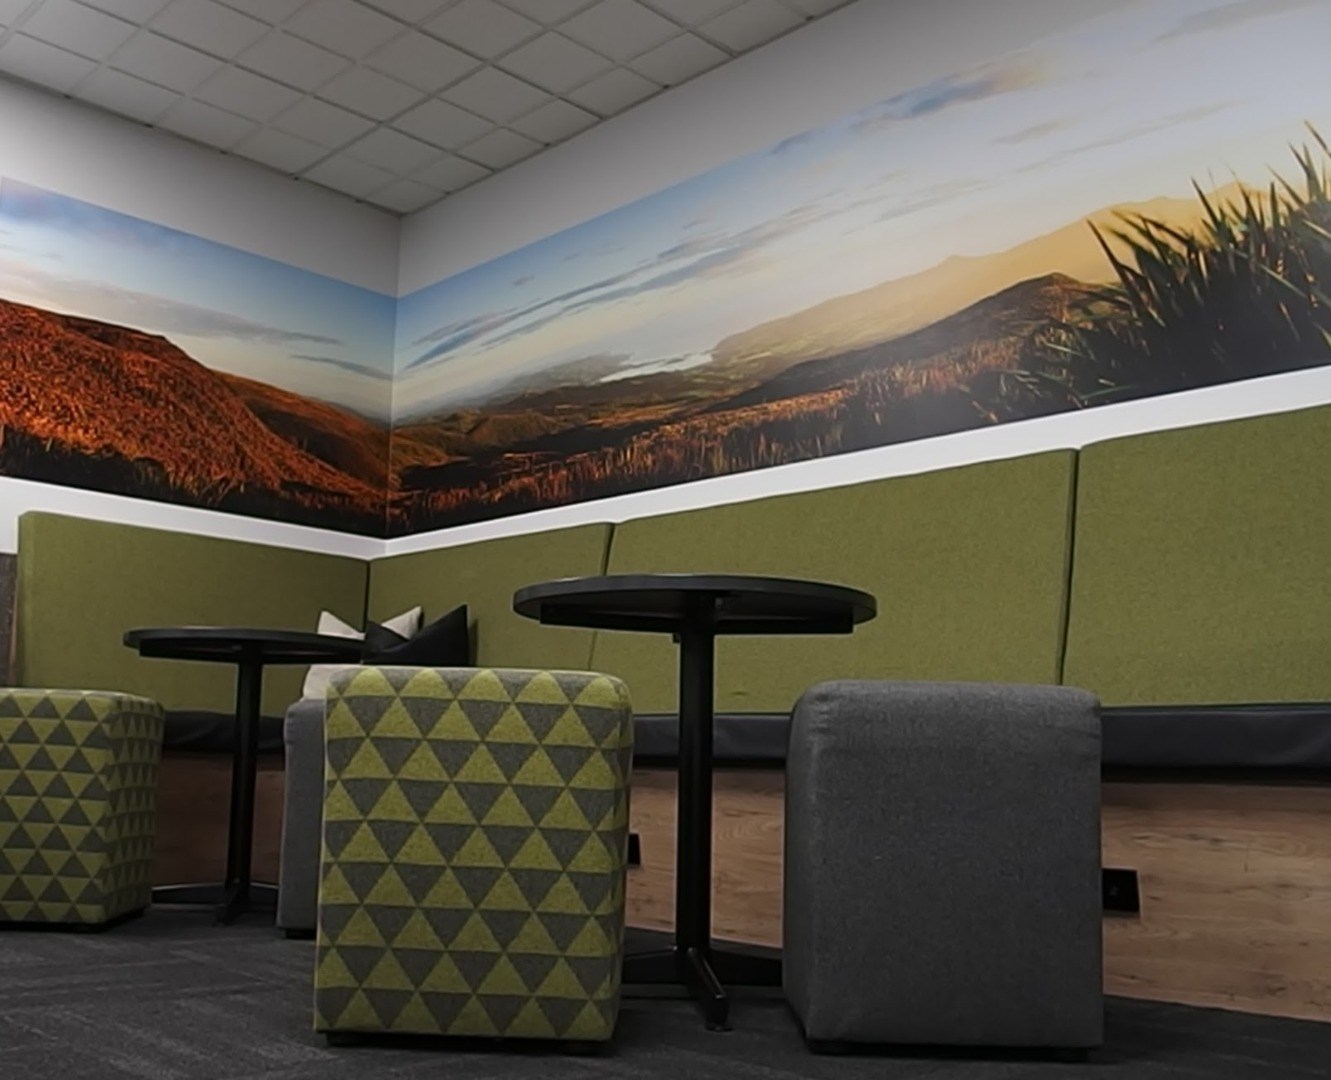 Office fitout large format printing office interior dunedin